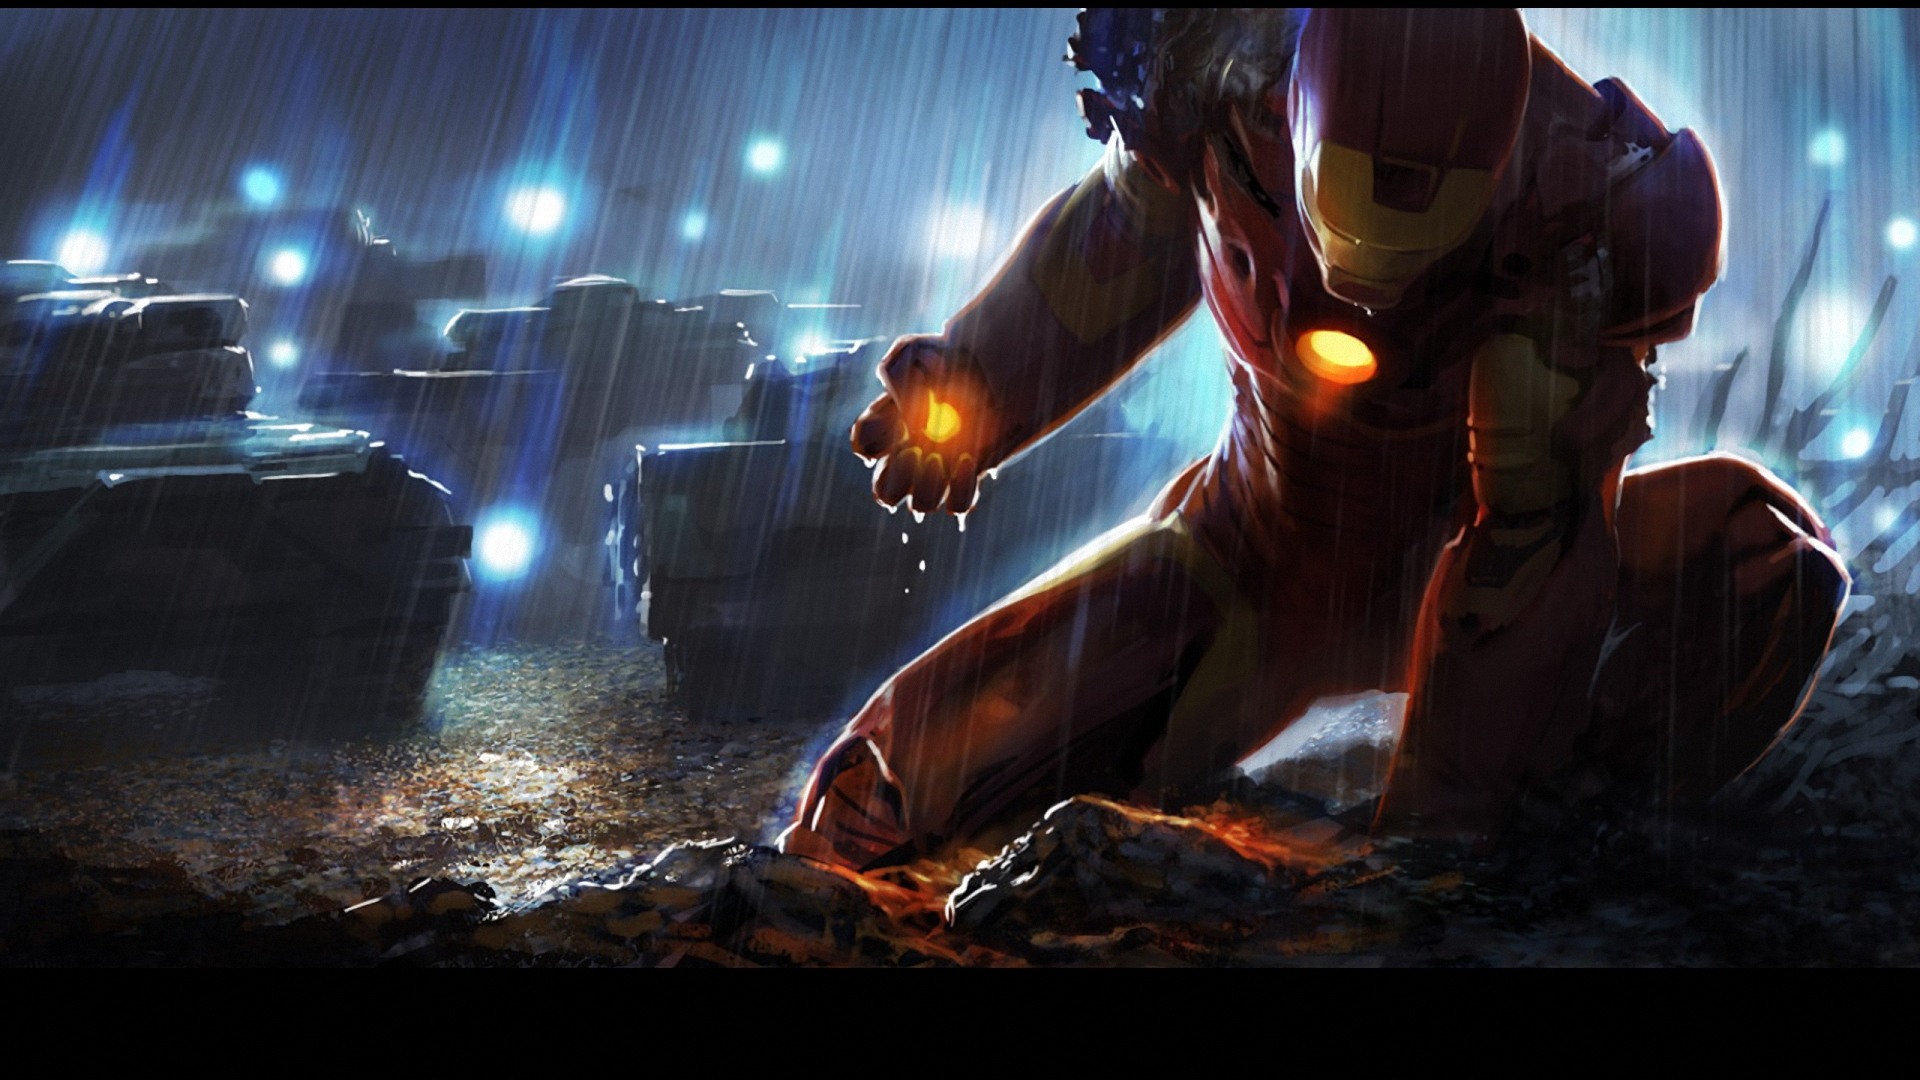 Iron Man power control 1920x1080 Wallpapers 1920x1080 Wallpapers